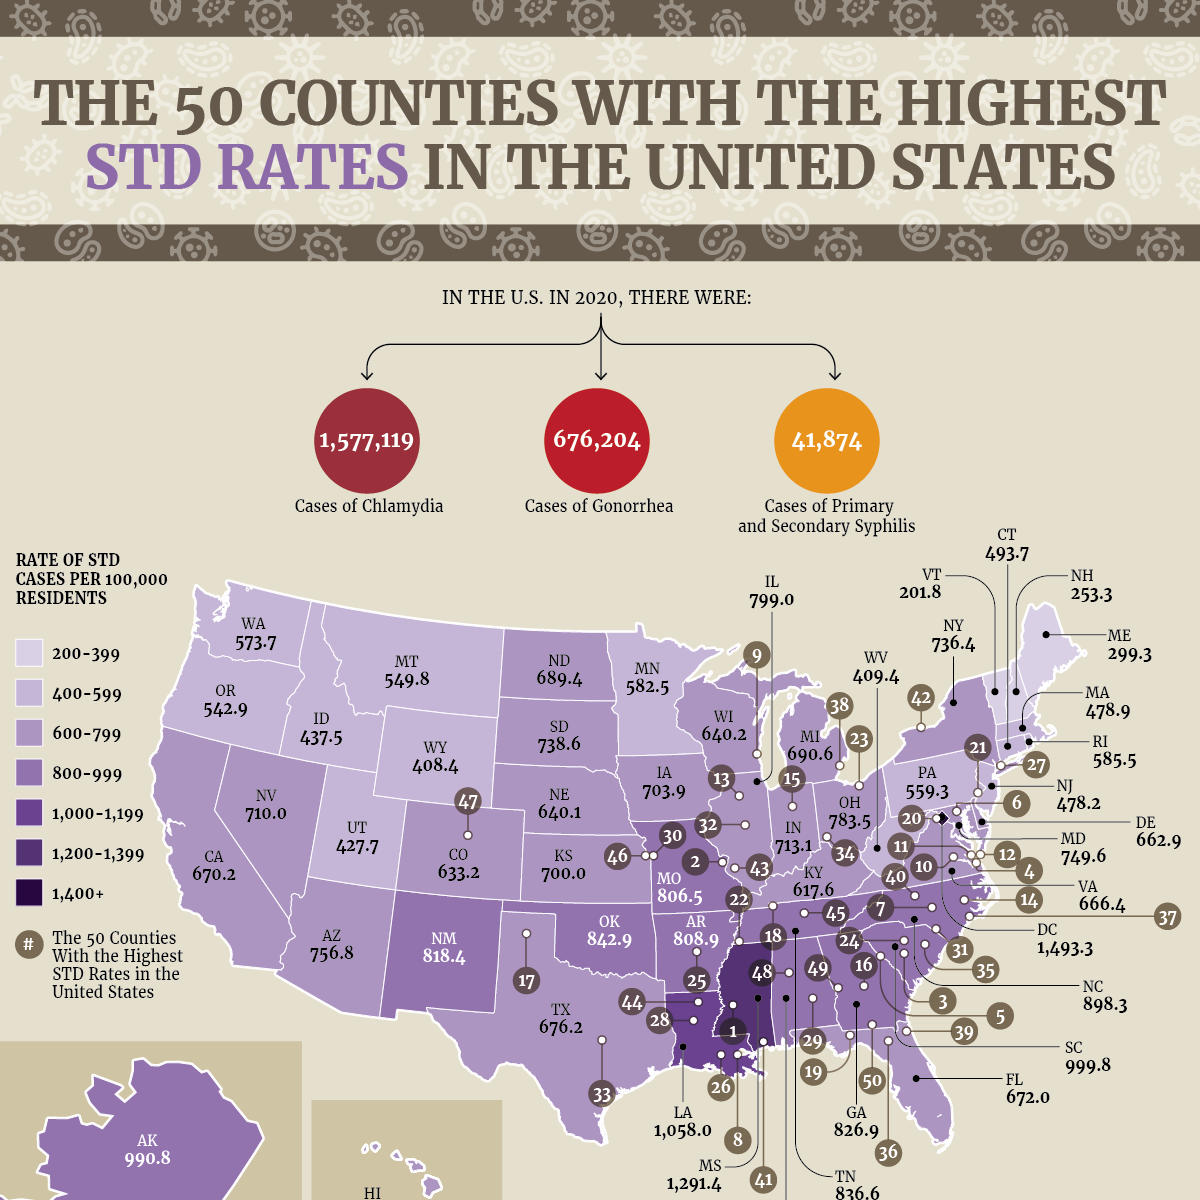 The 50 Counties With the Highest STD Rates in the United States NY